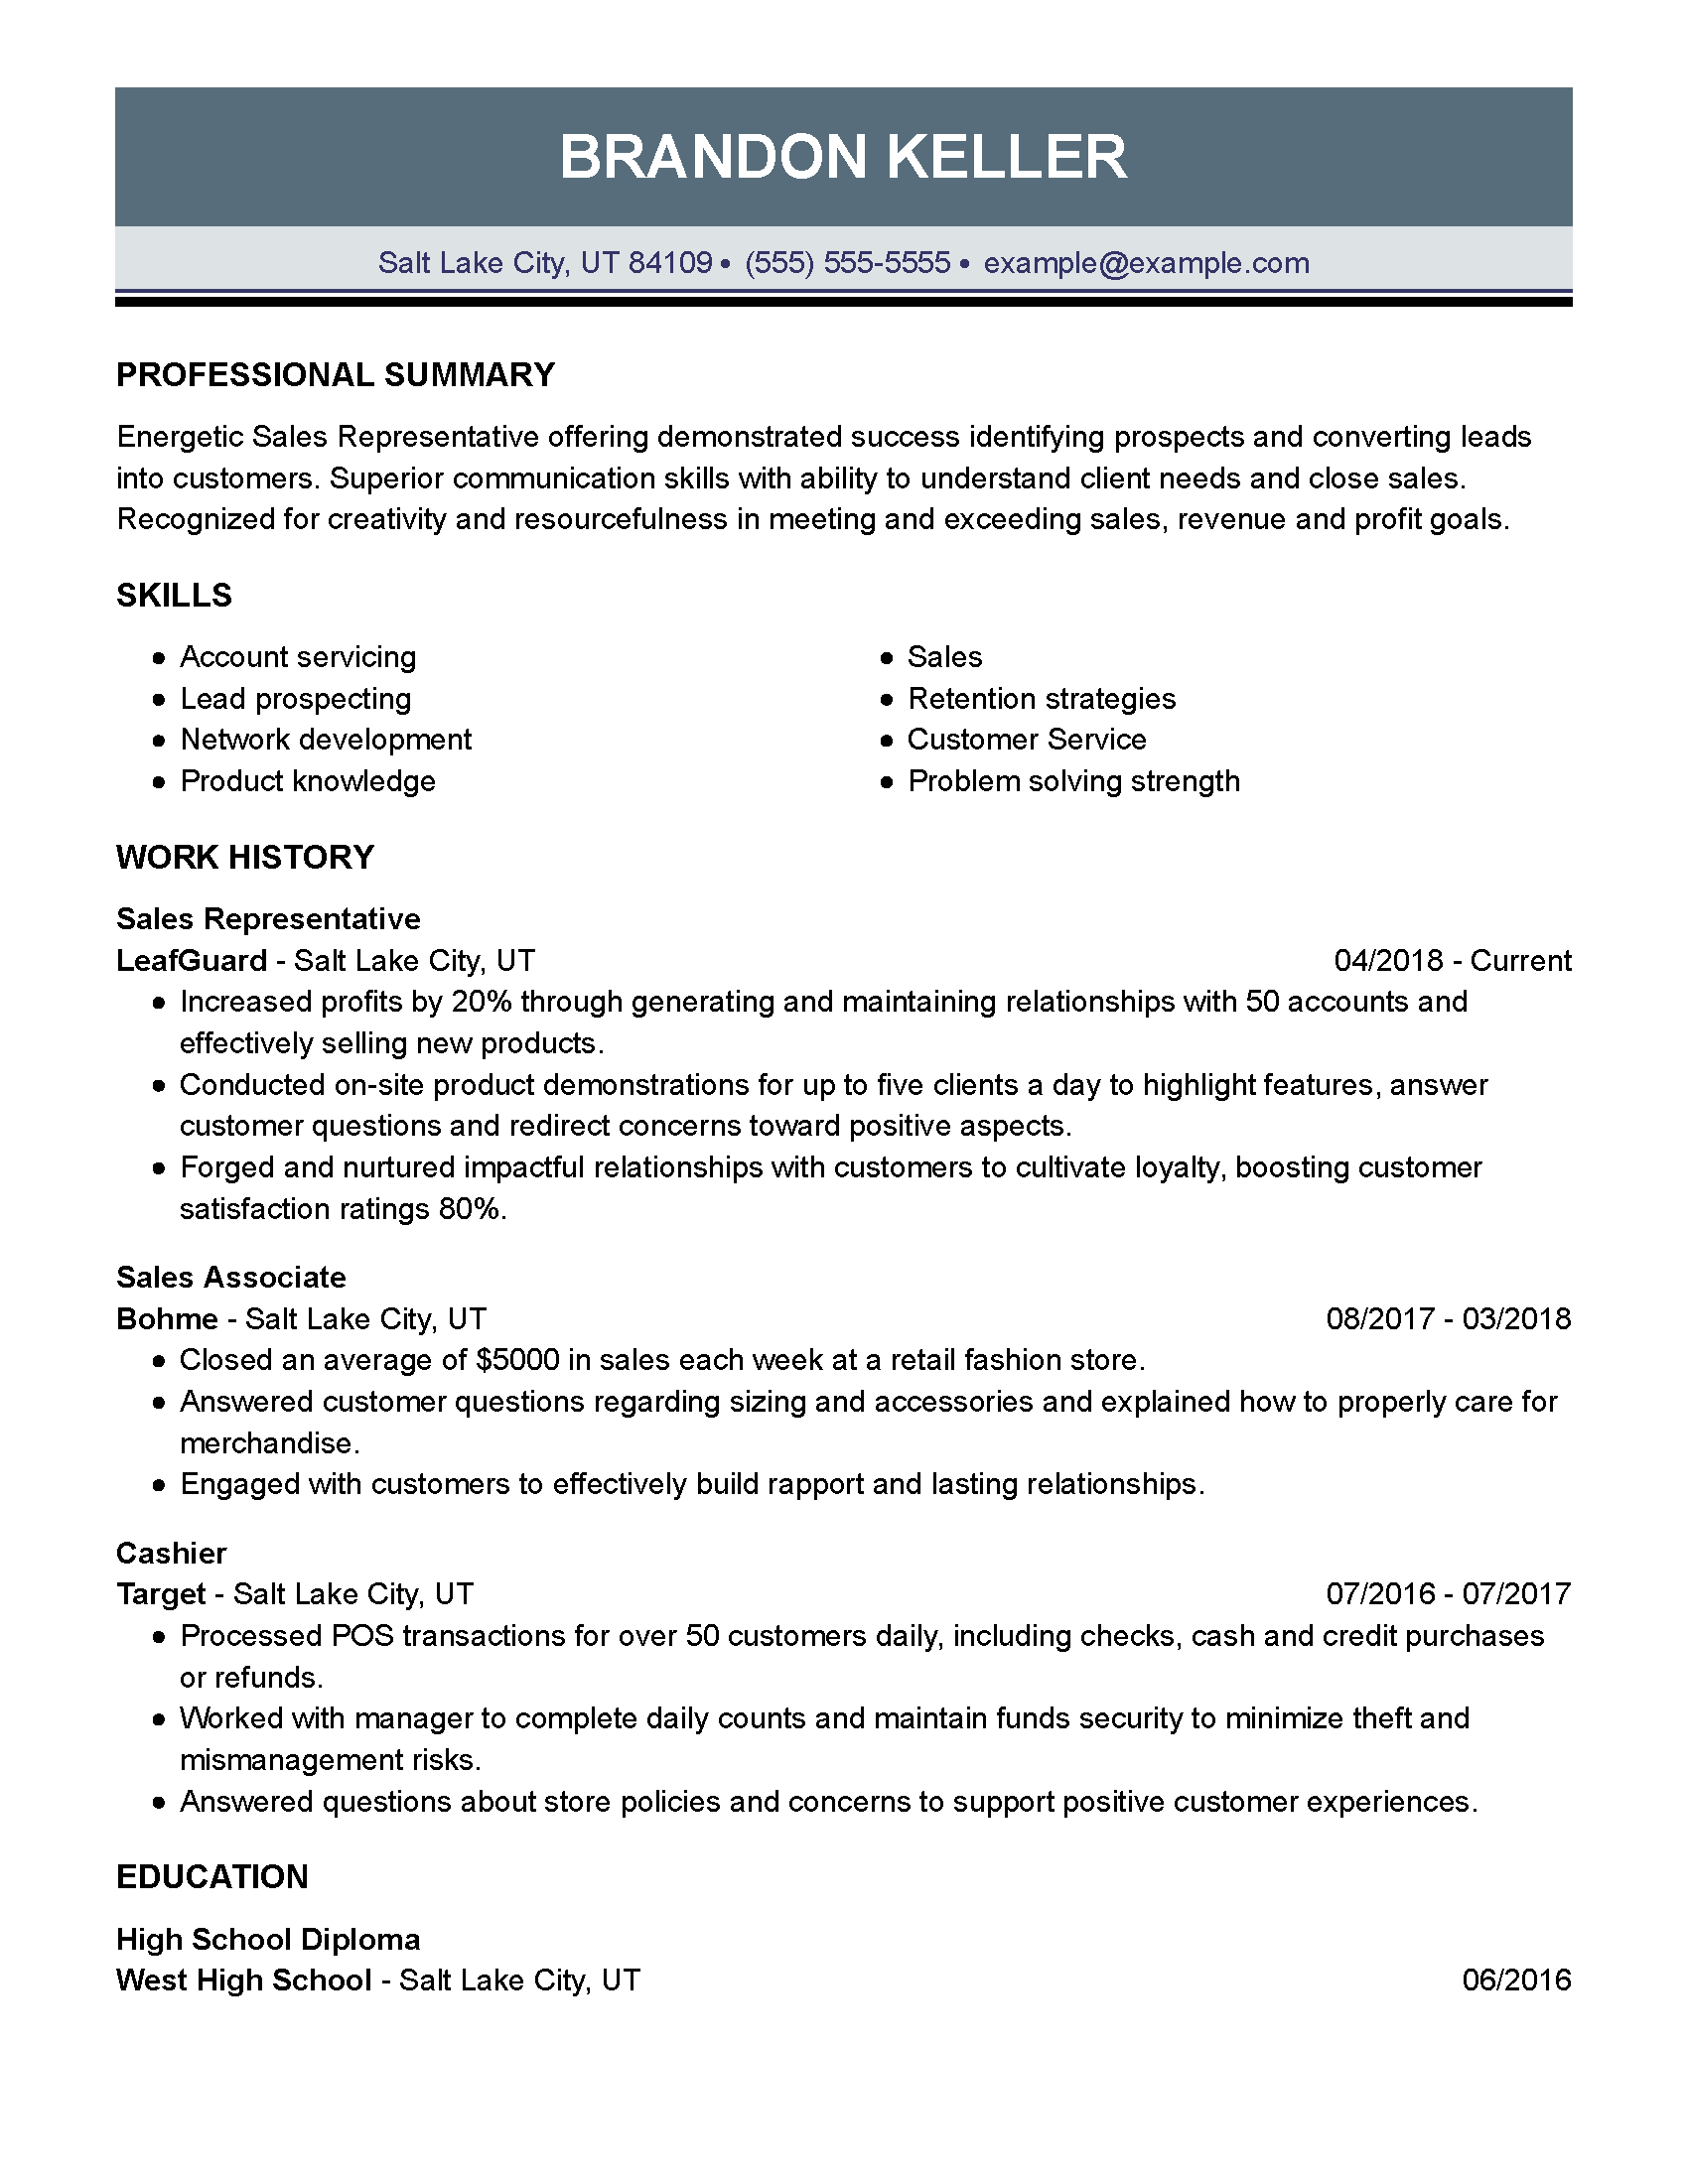 personal summary for resume examples